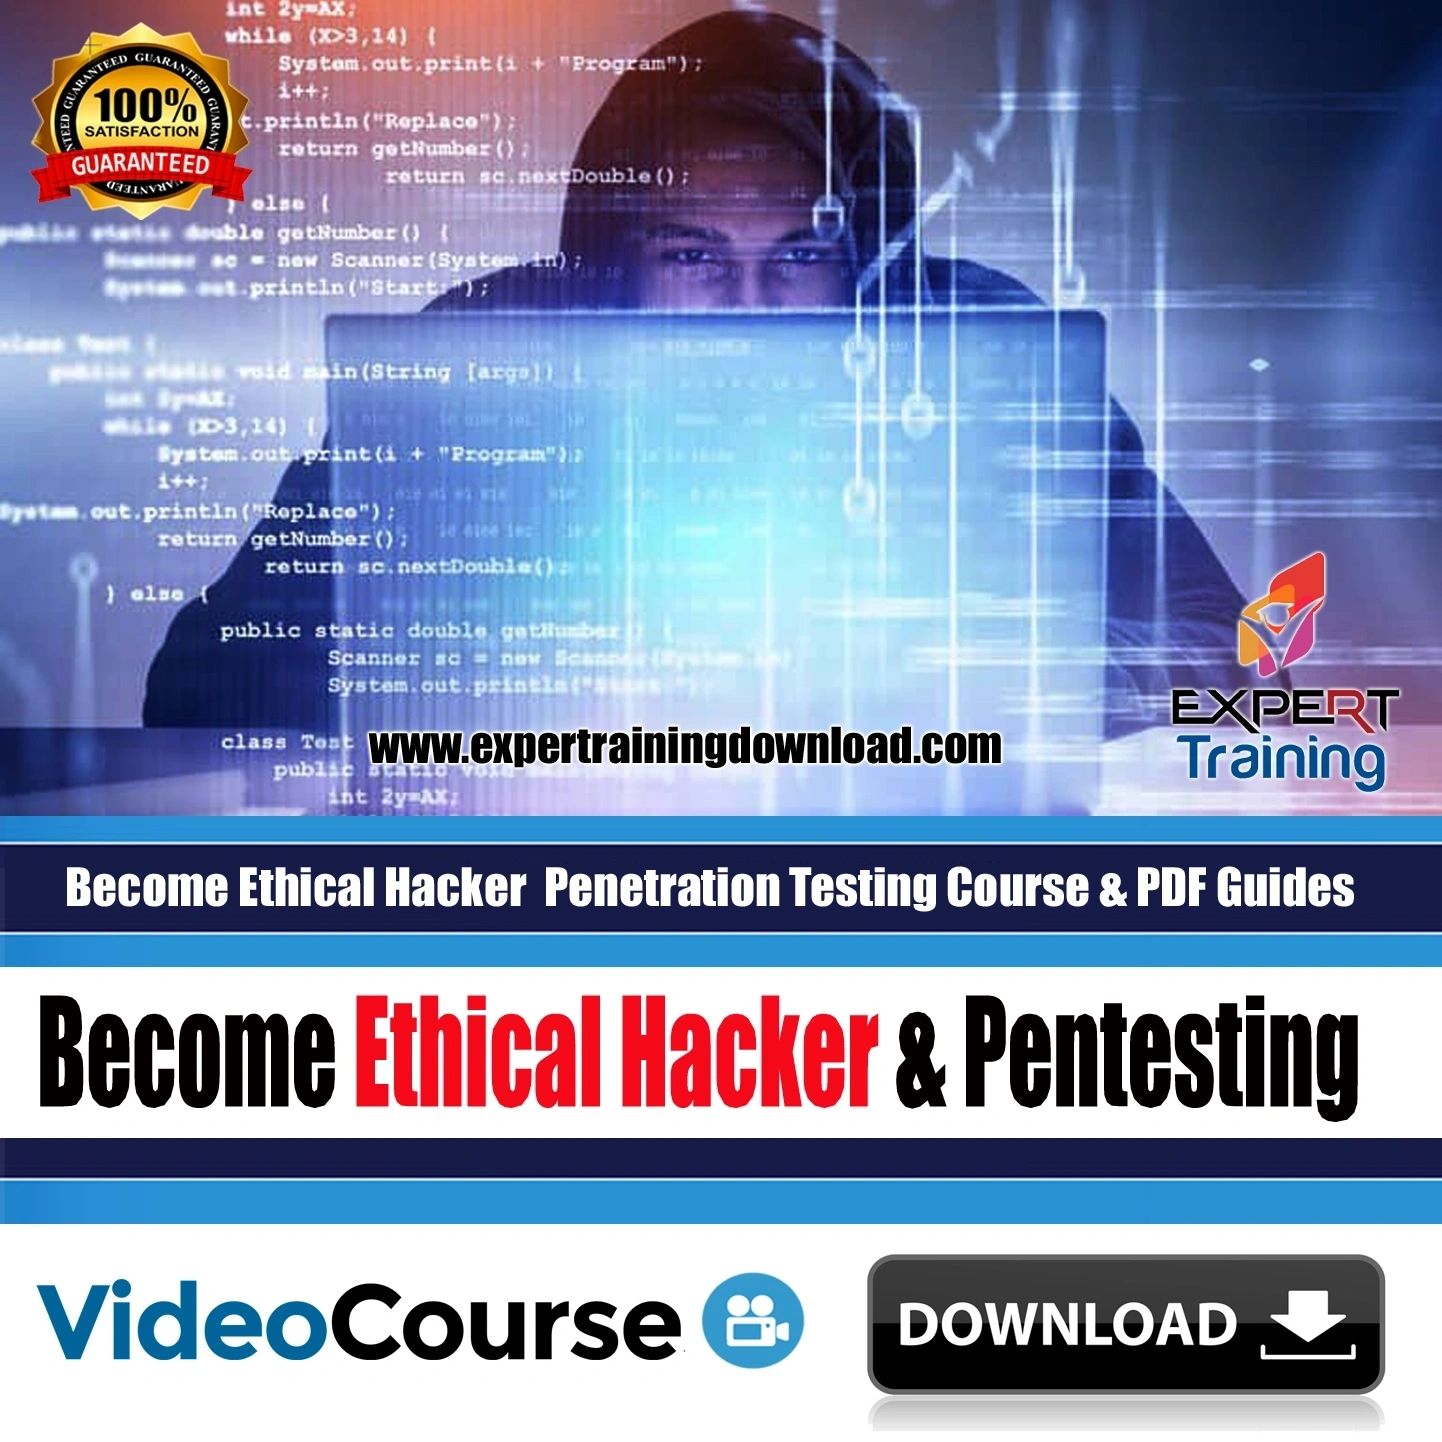 Become Ethical Hacker Penetration Testing Course & PDF Guides